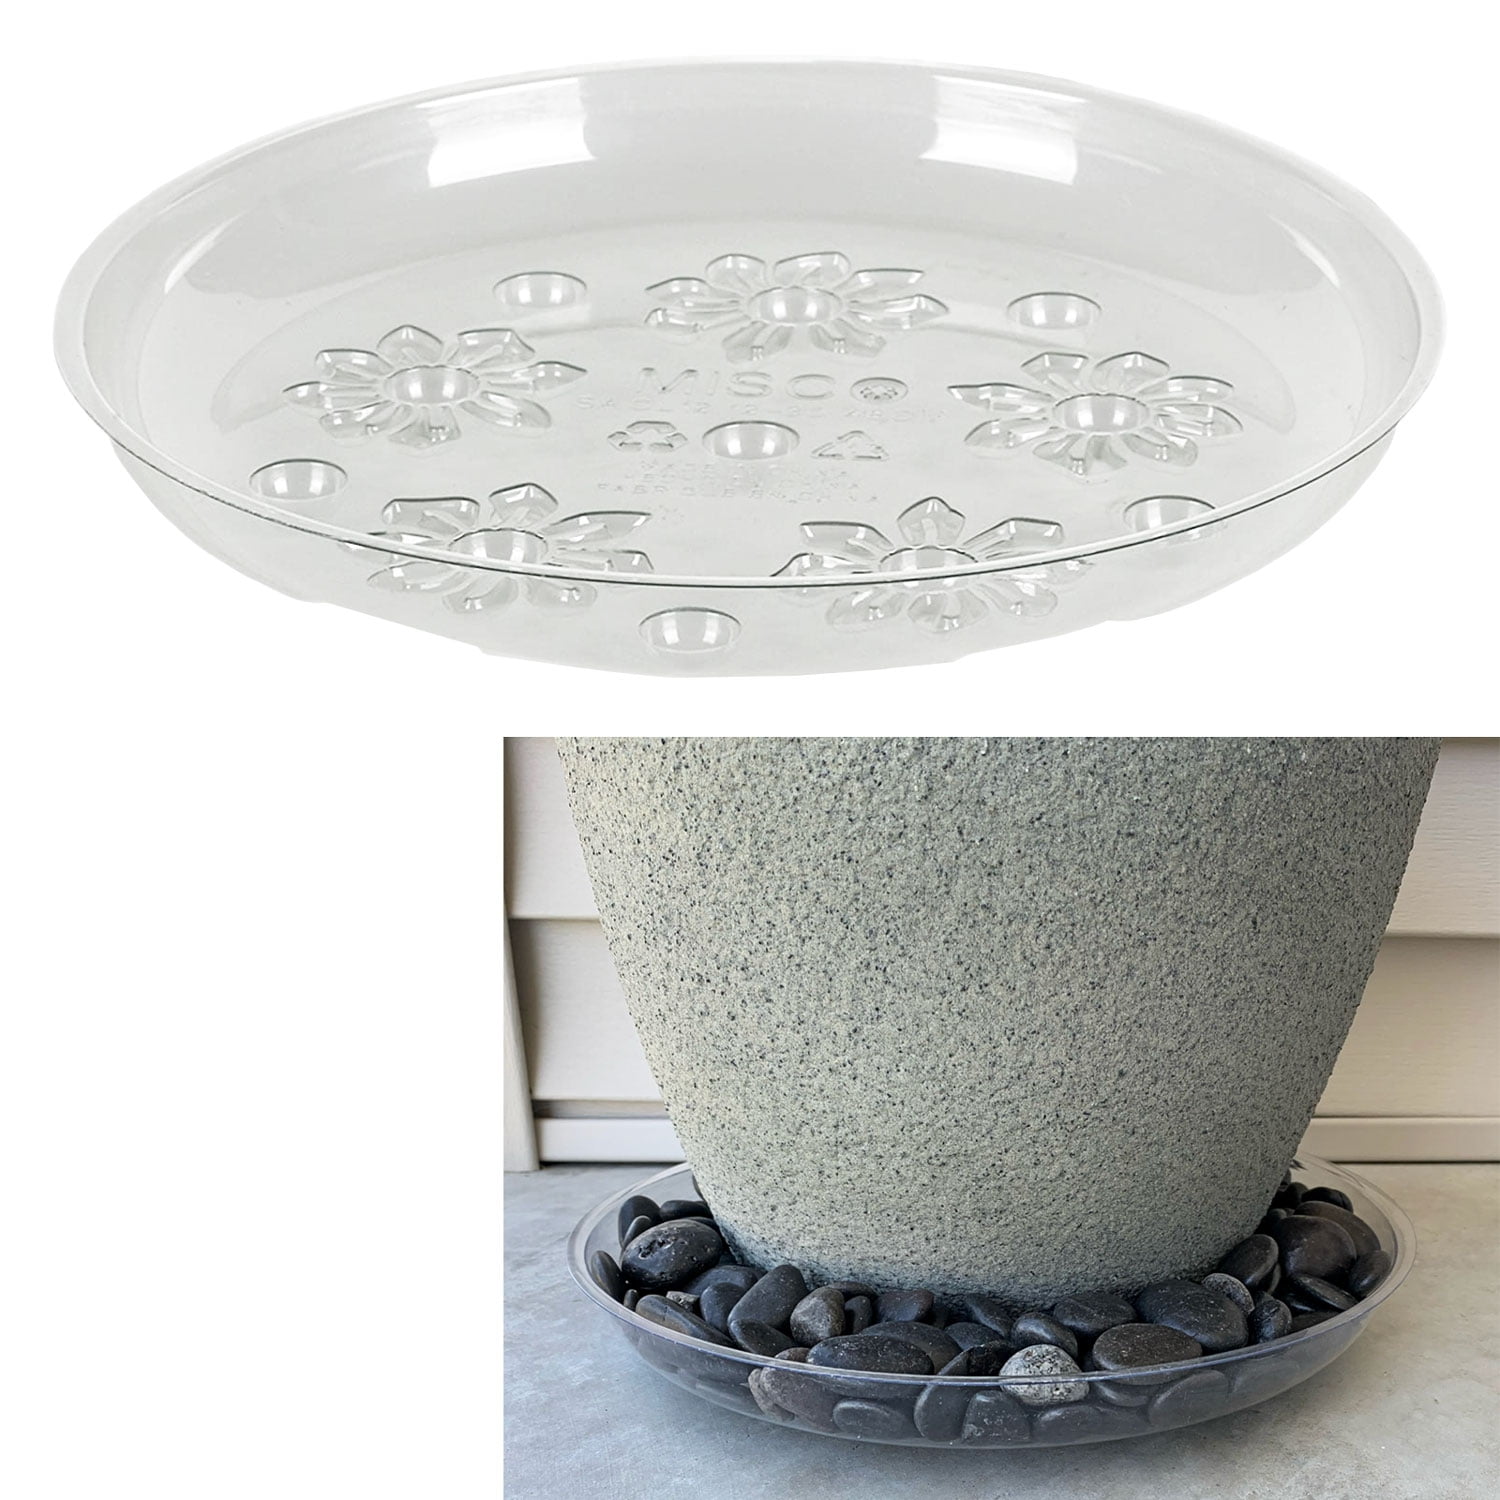 Details about   5PCS Round Strong Plastic Plant-Pot Saucer Base Water Drip Tray Saucers 